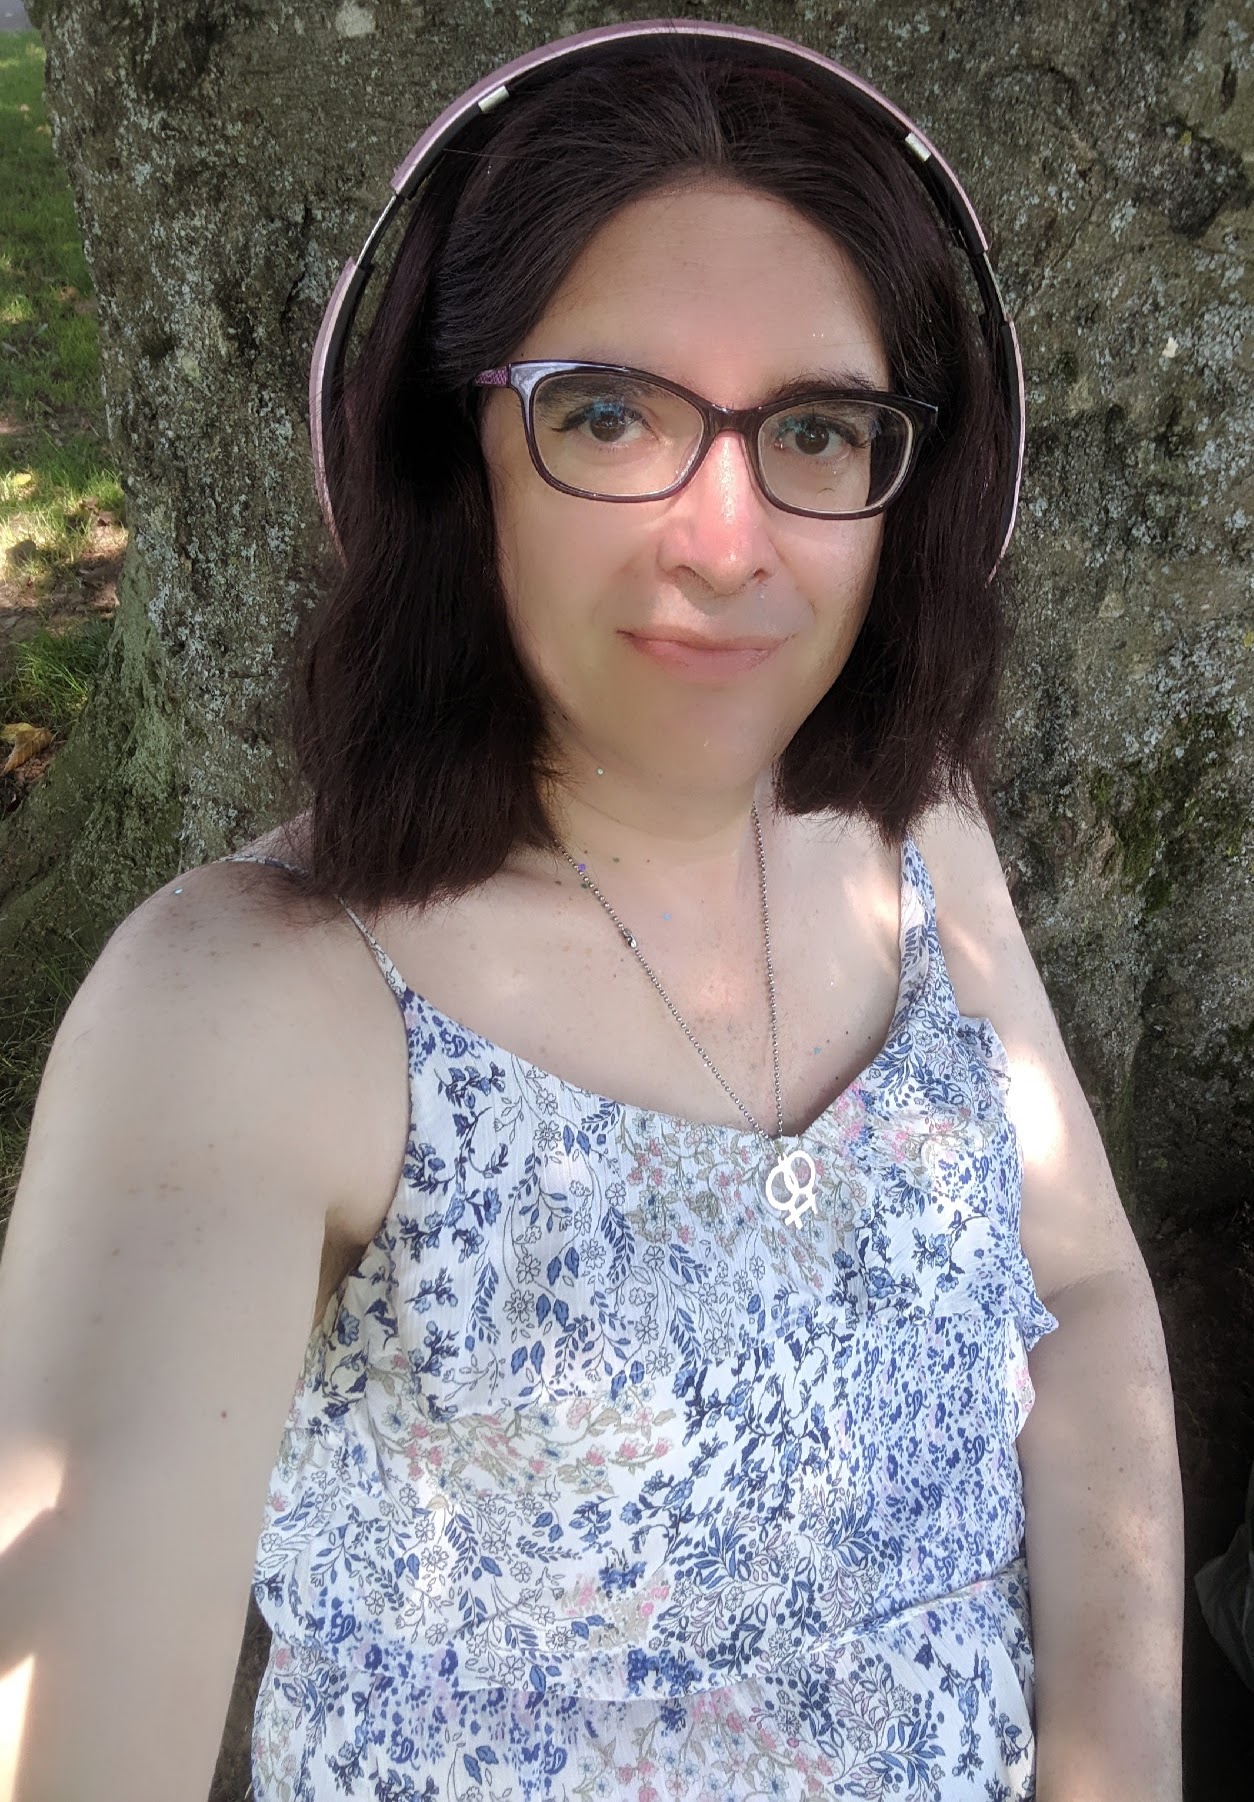 Selfie of me looking at the camera while I'm sat against a tree. I have shoulder length red-tinted black hair cut in a bob, and I have a red fabric hairband holding my hair back off my face. Over the top of the hairband I am wearing my pink headphones